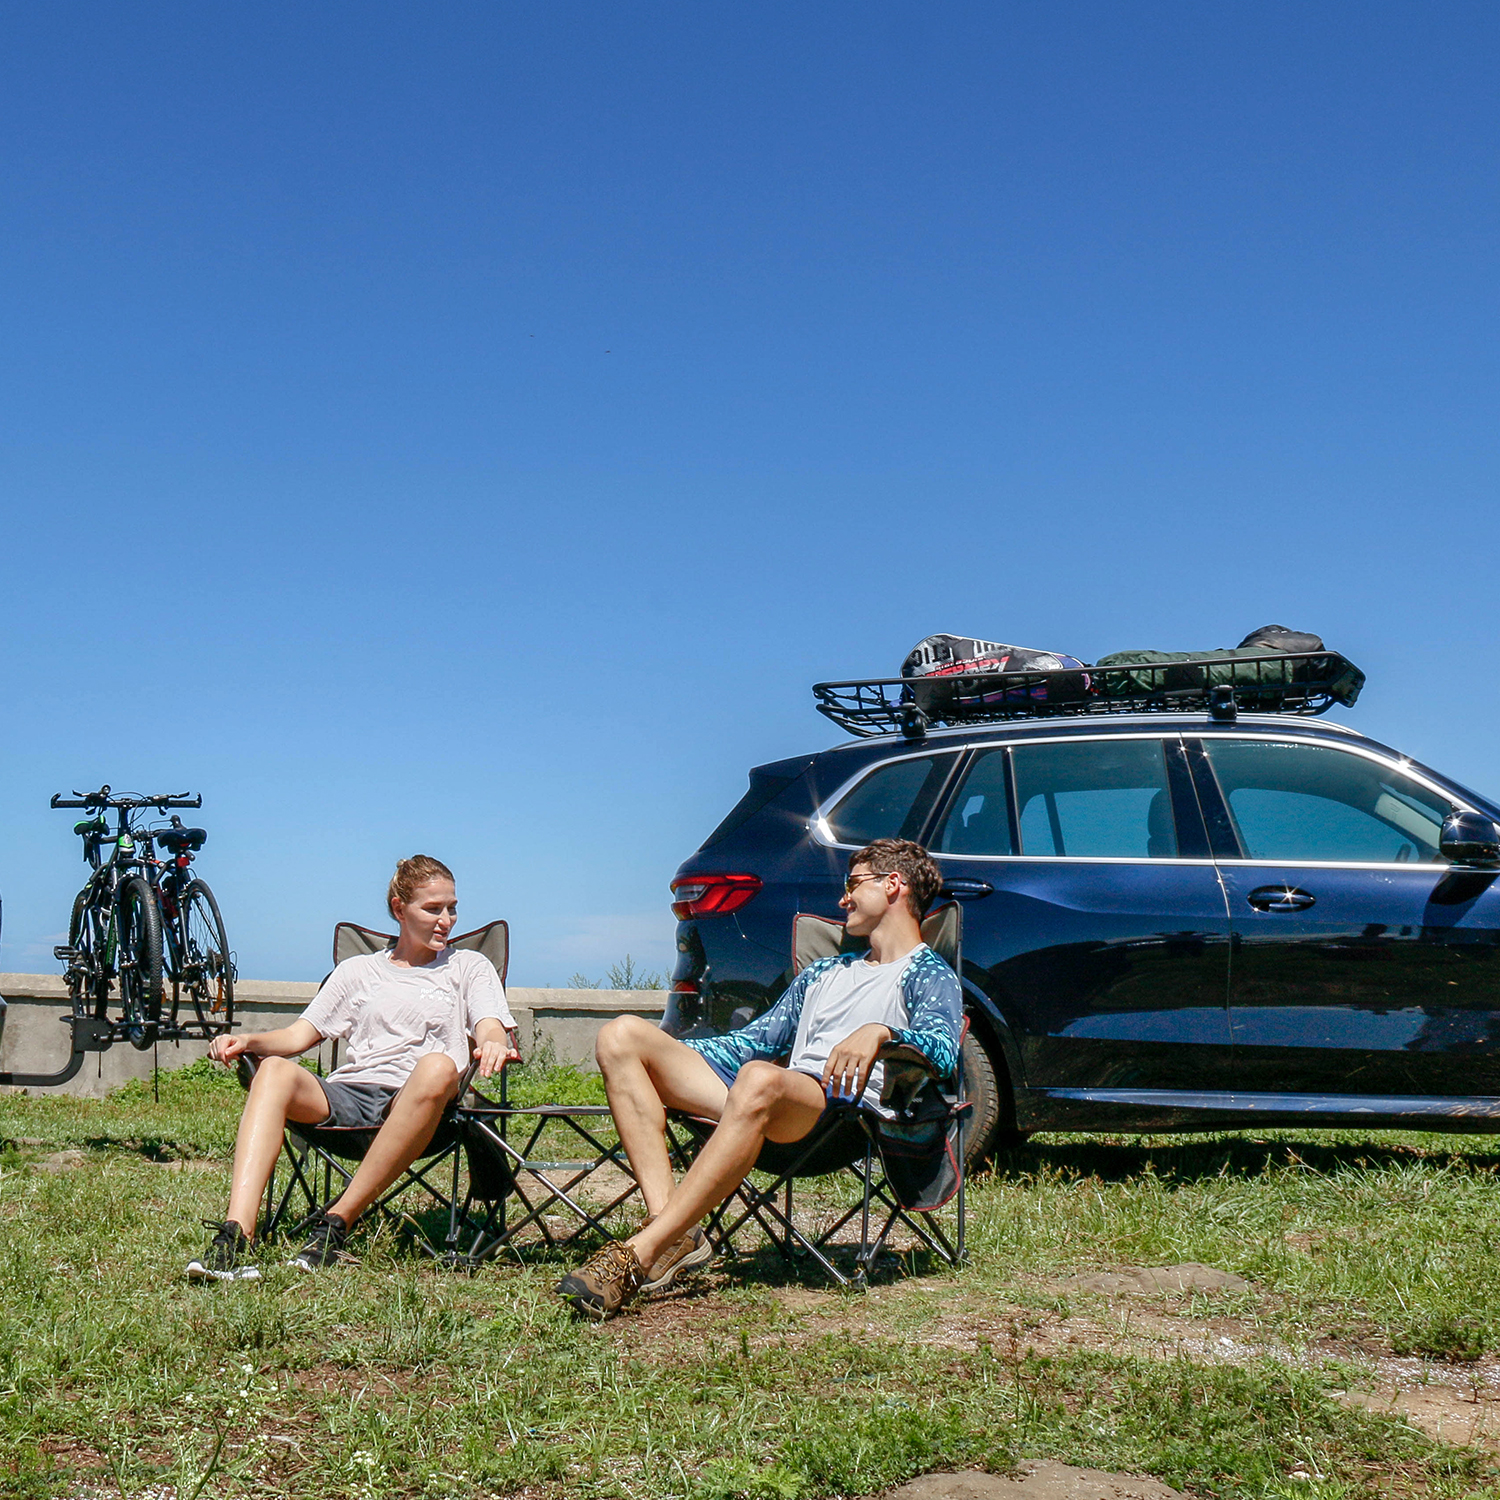 Knowledge about roof racks